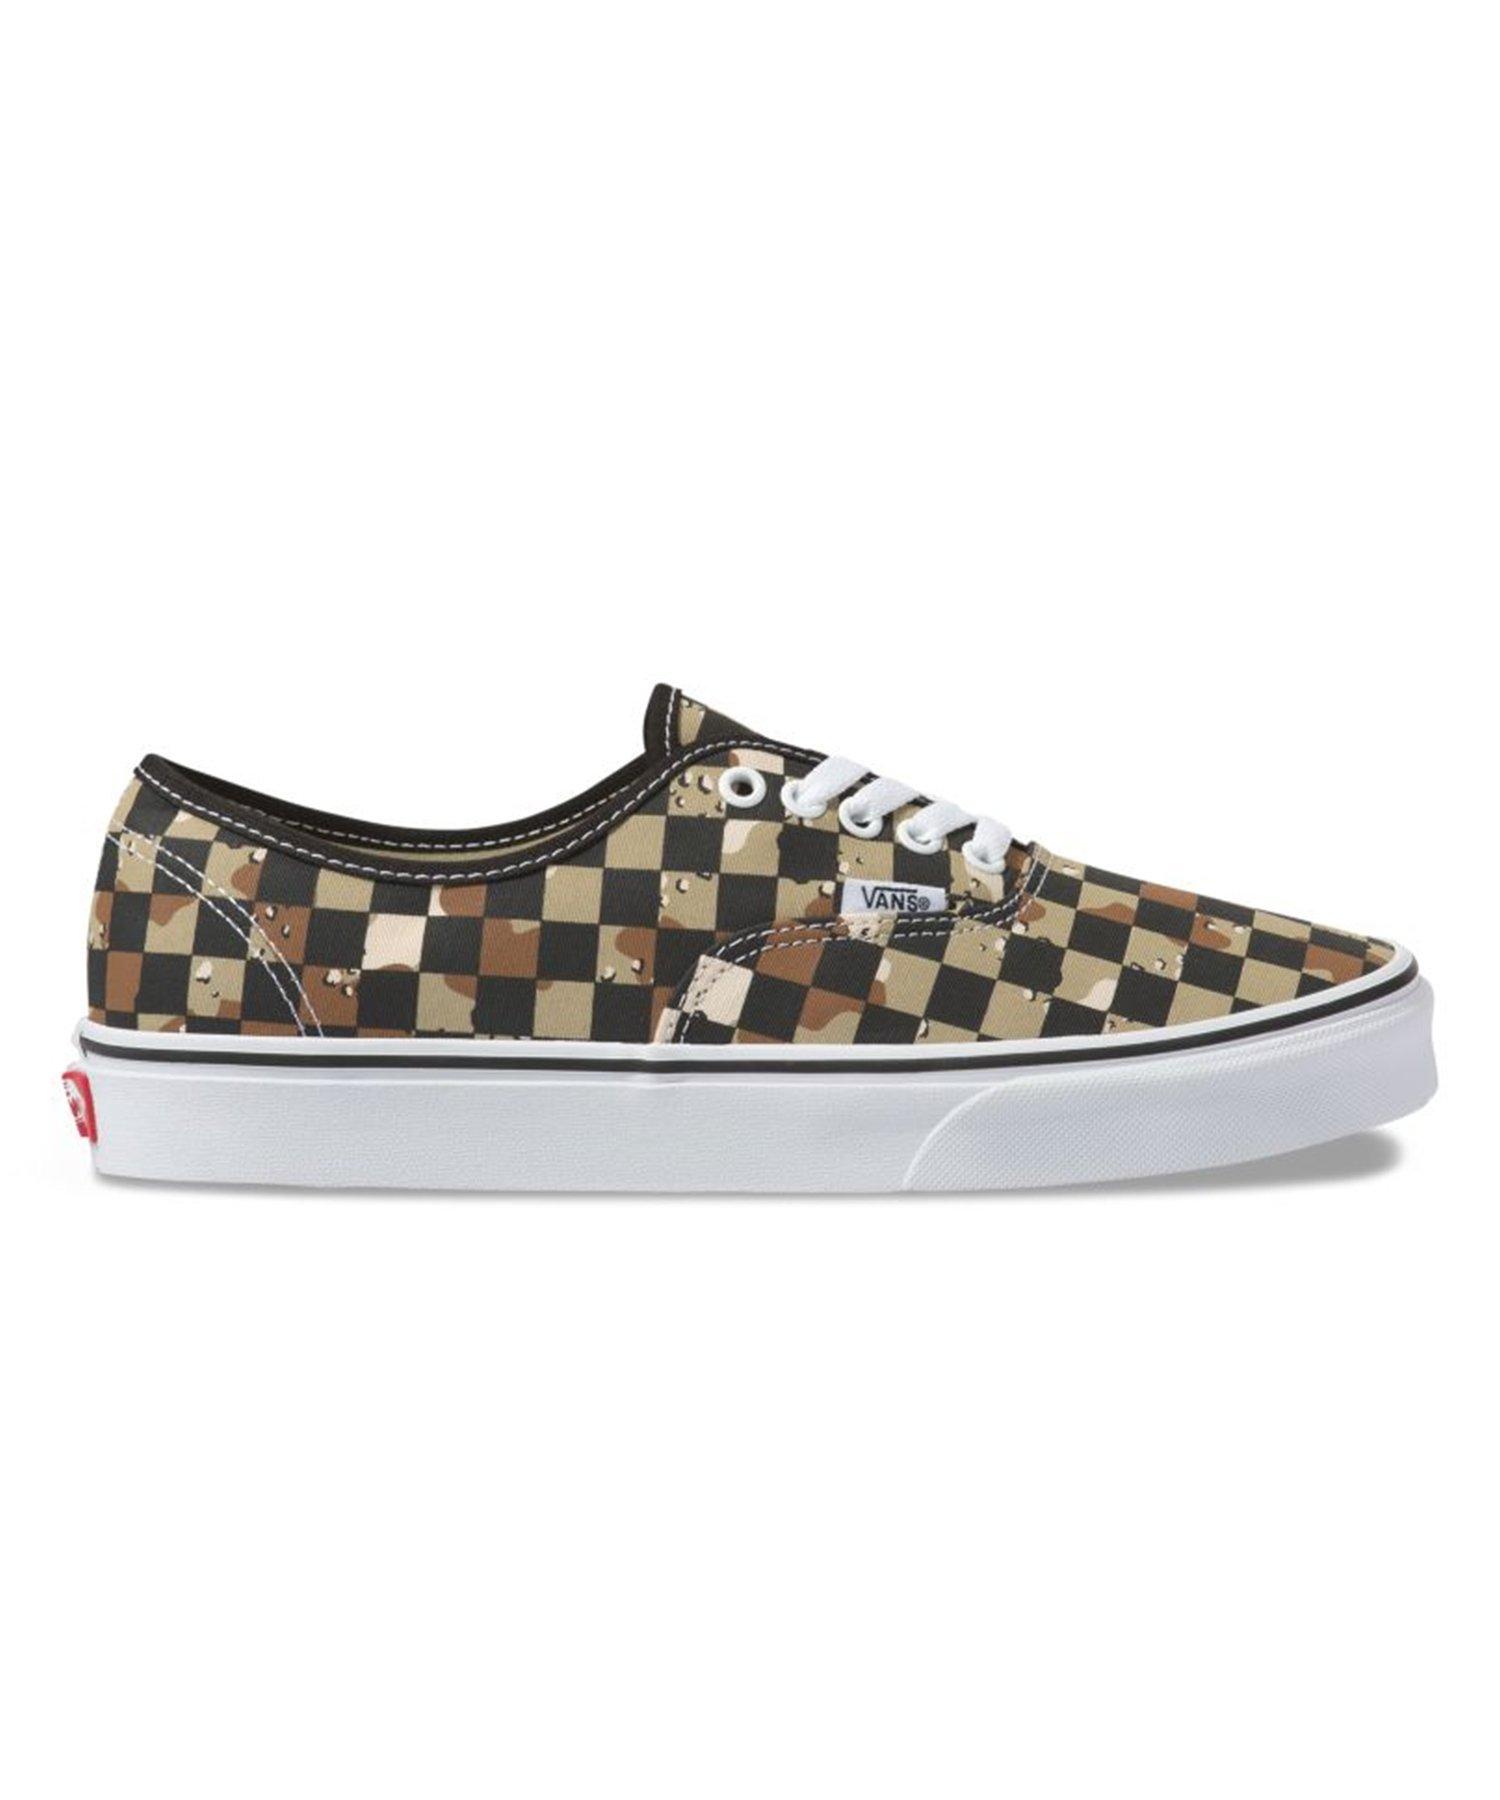 Vans Canvas Camouflage Checkerboard Authentic for Men - Lyst